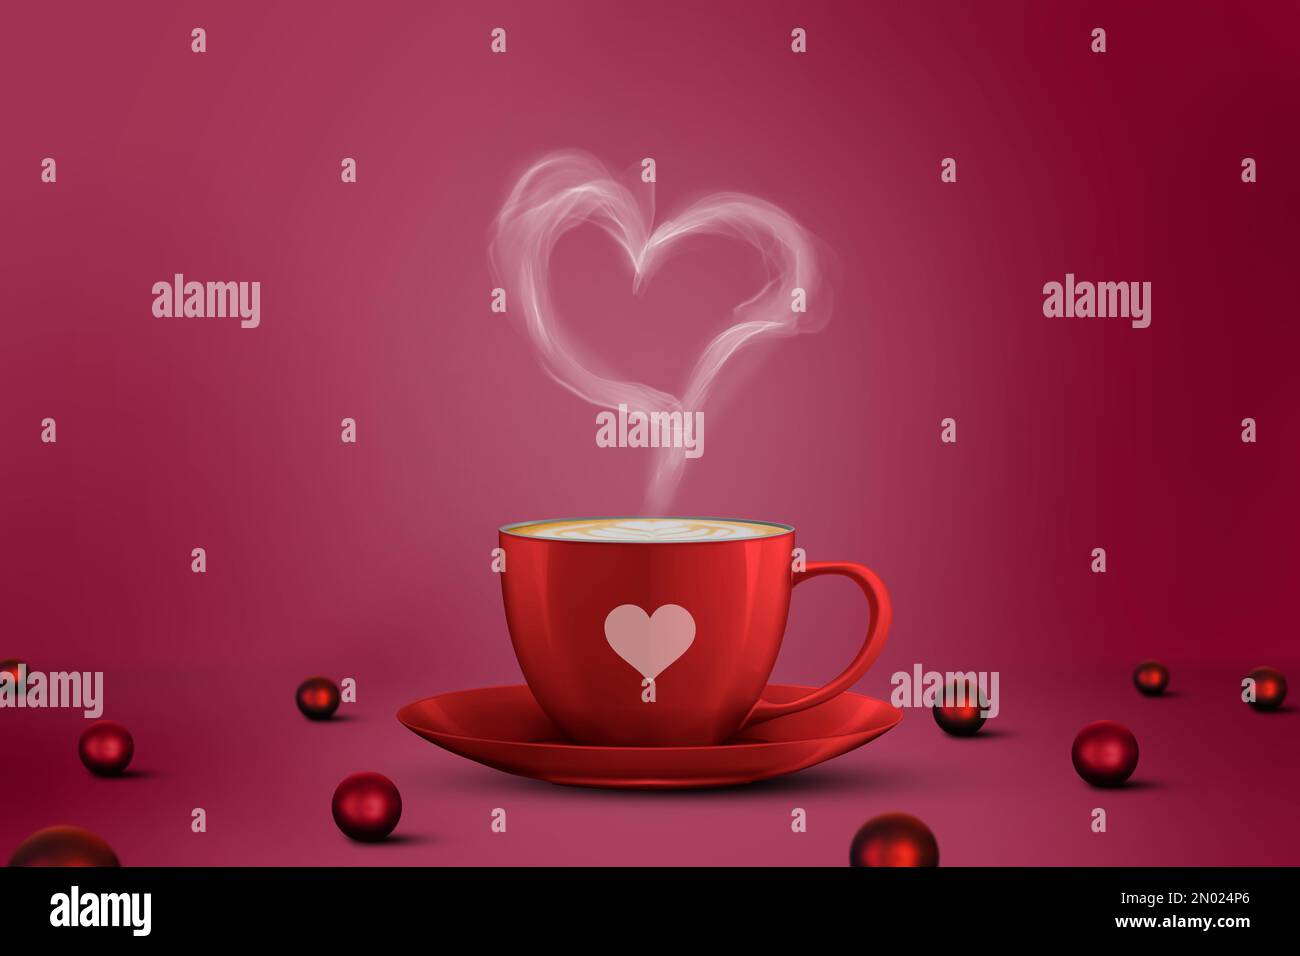 https://c8.alamy.com/comp/2N024P6/valentines-week-special-illustration-idea-heart-shape-of-steaming-coffee-cup-empty-space-2N024P6.jpg